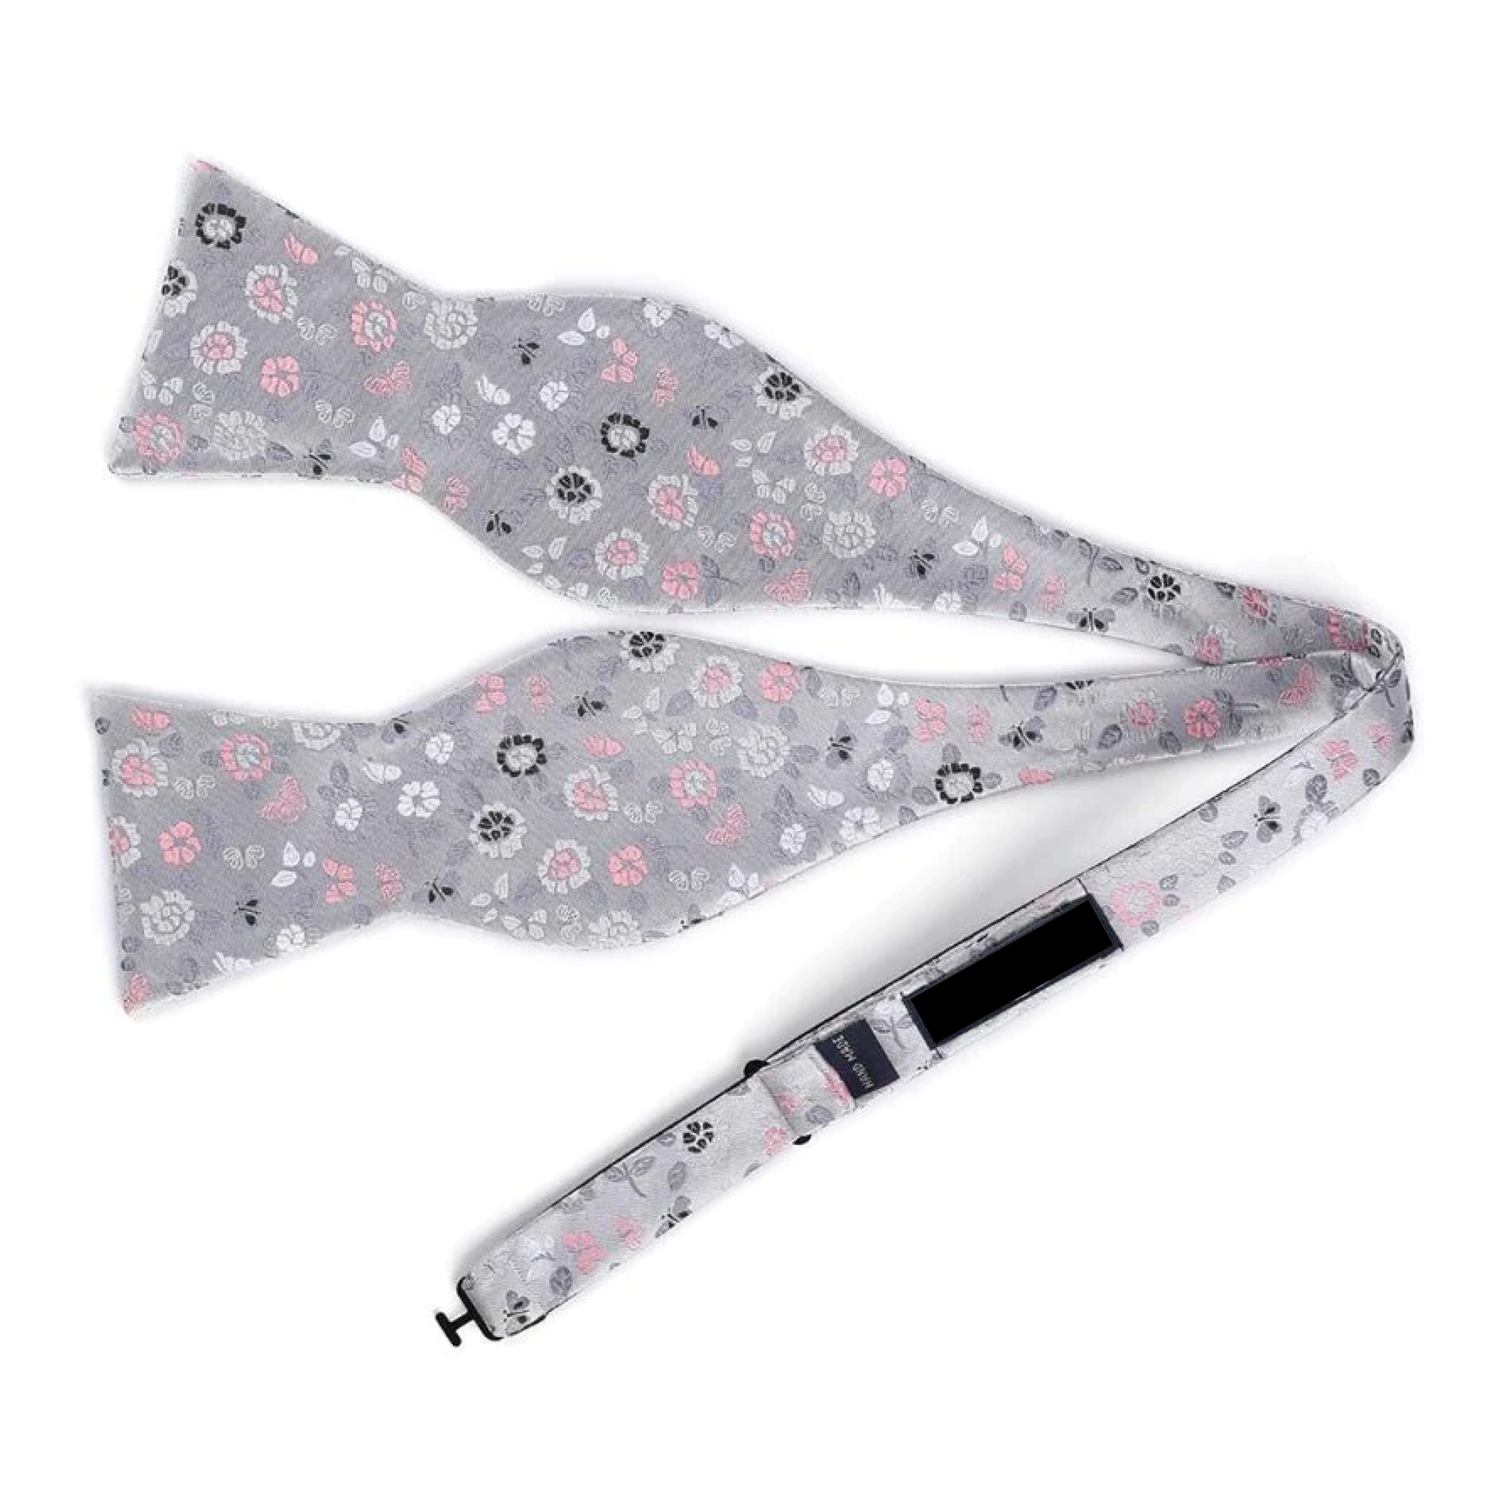 Self Tie: A Light Silver, Grey, Pink, White Floral Pattern Silk Self Tie Bow Tie, ||Silver, Pink, White, Black